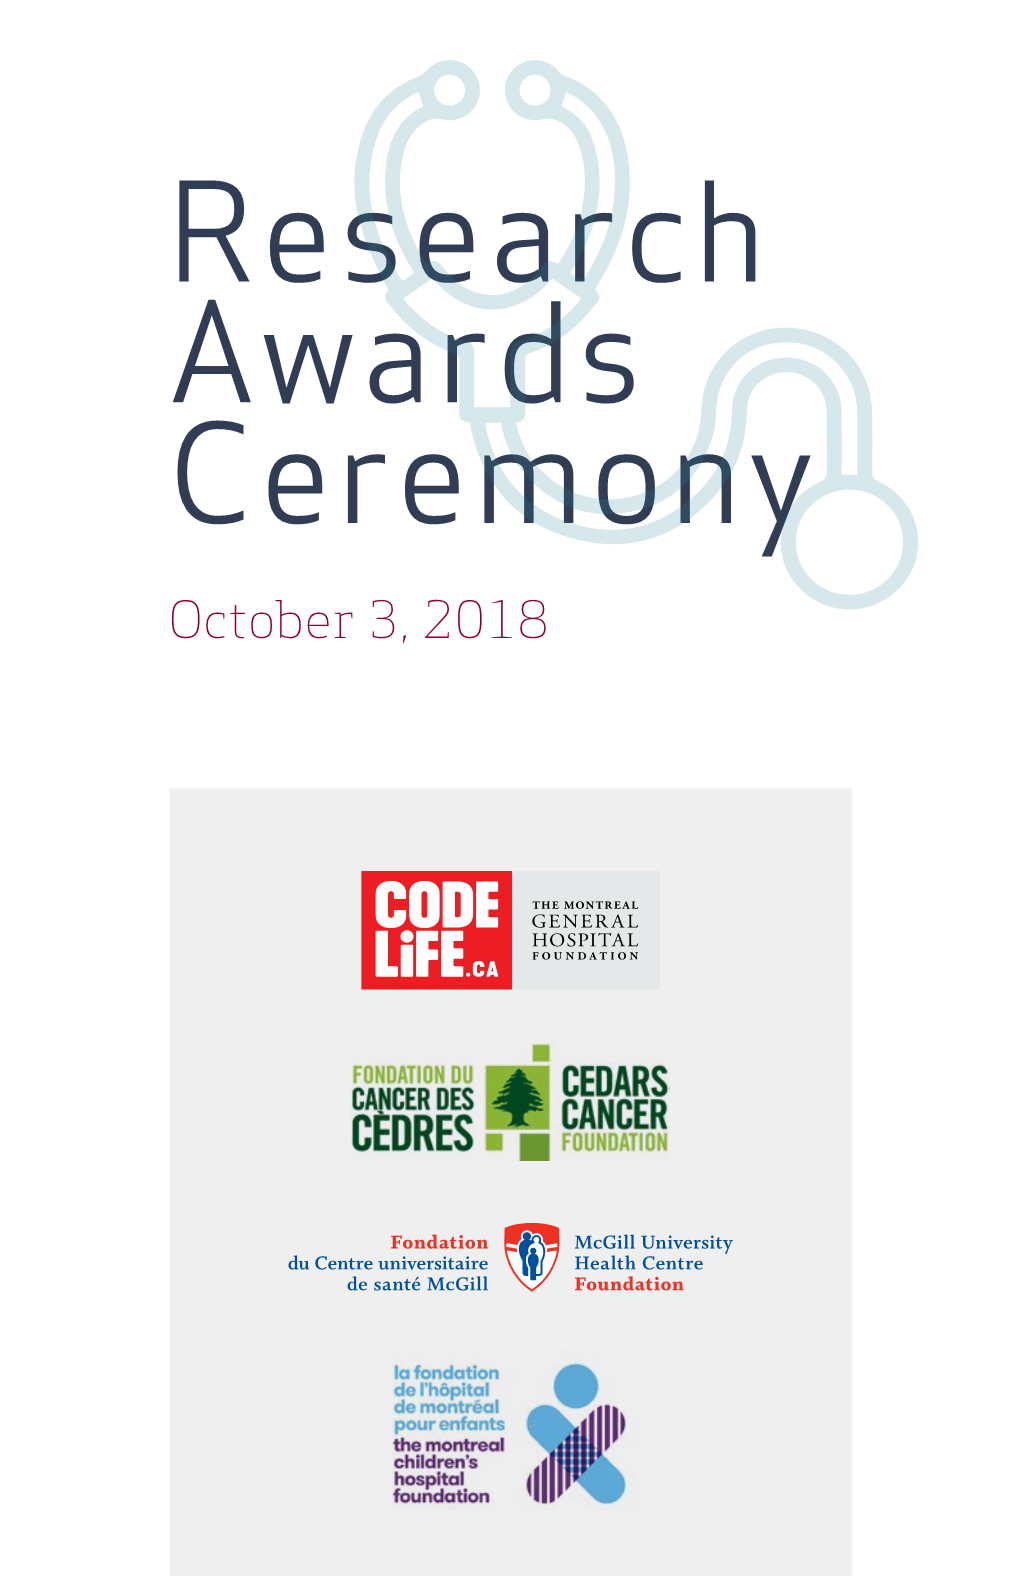 Research Awards Ceremony October 3, 2018 Allergy & Immunology